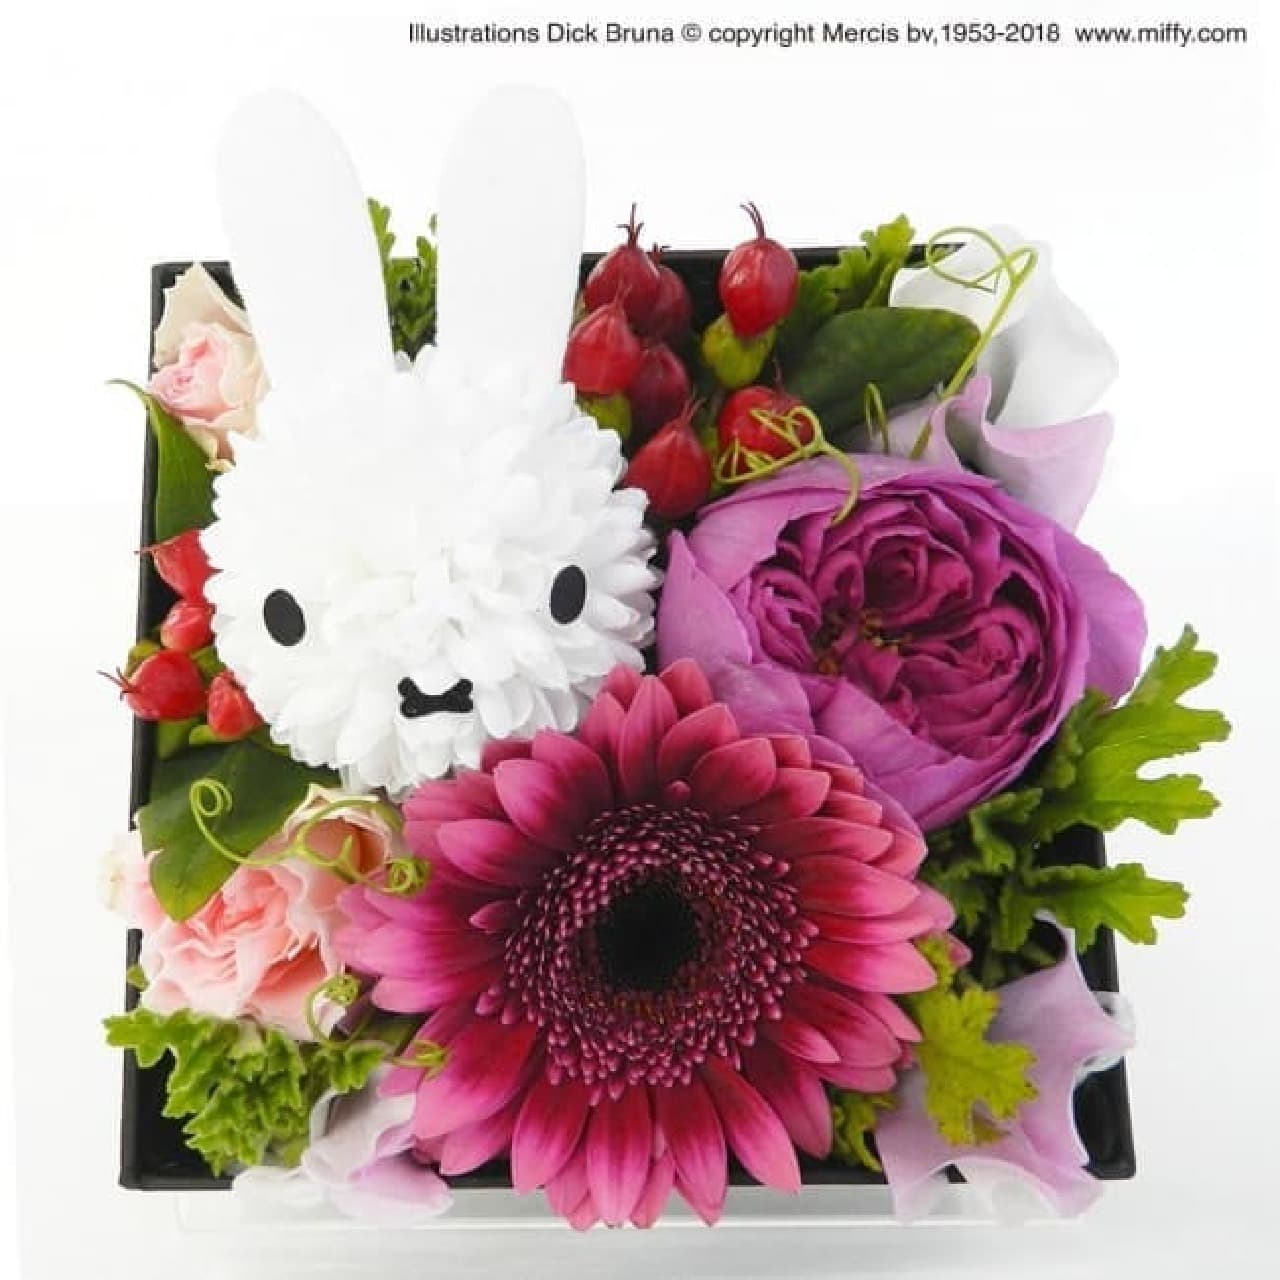 Miffy gift items such as flower box arrangements and photo stands